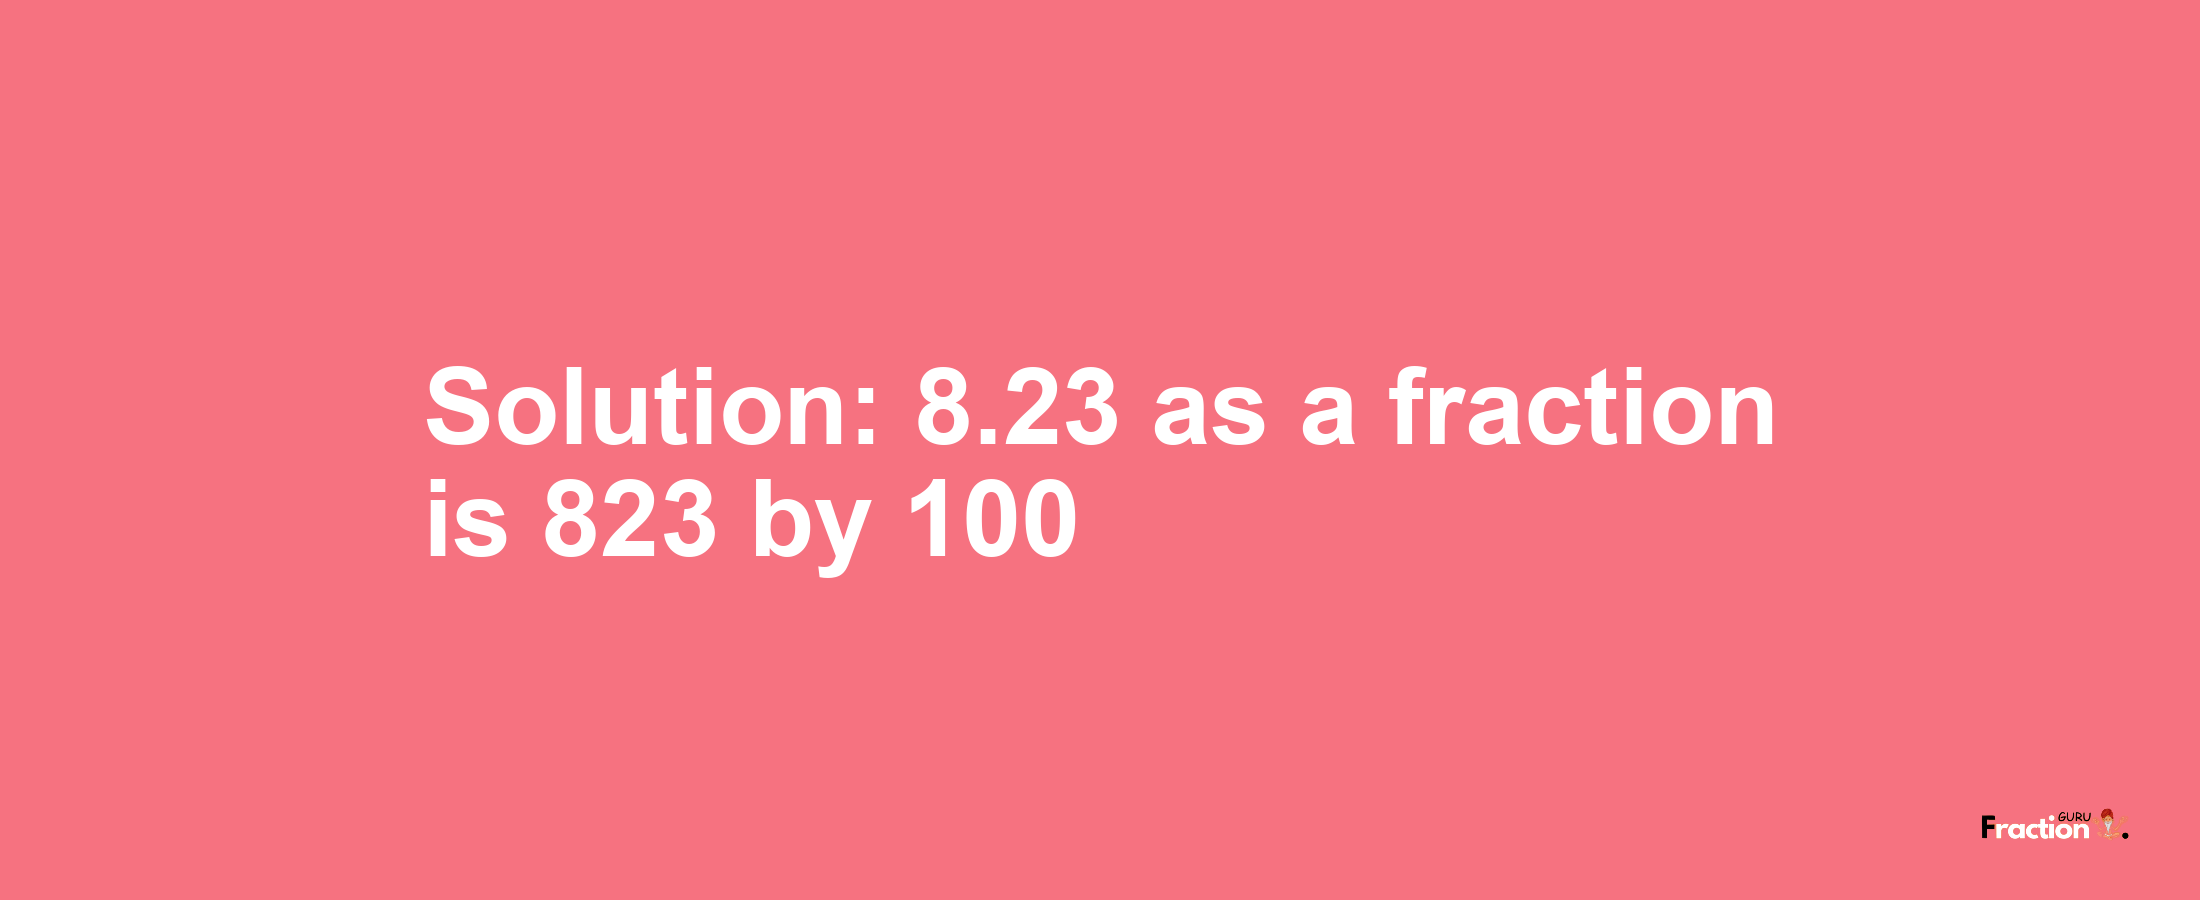 Solution:8.23 as a fraction is 823/100